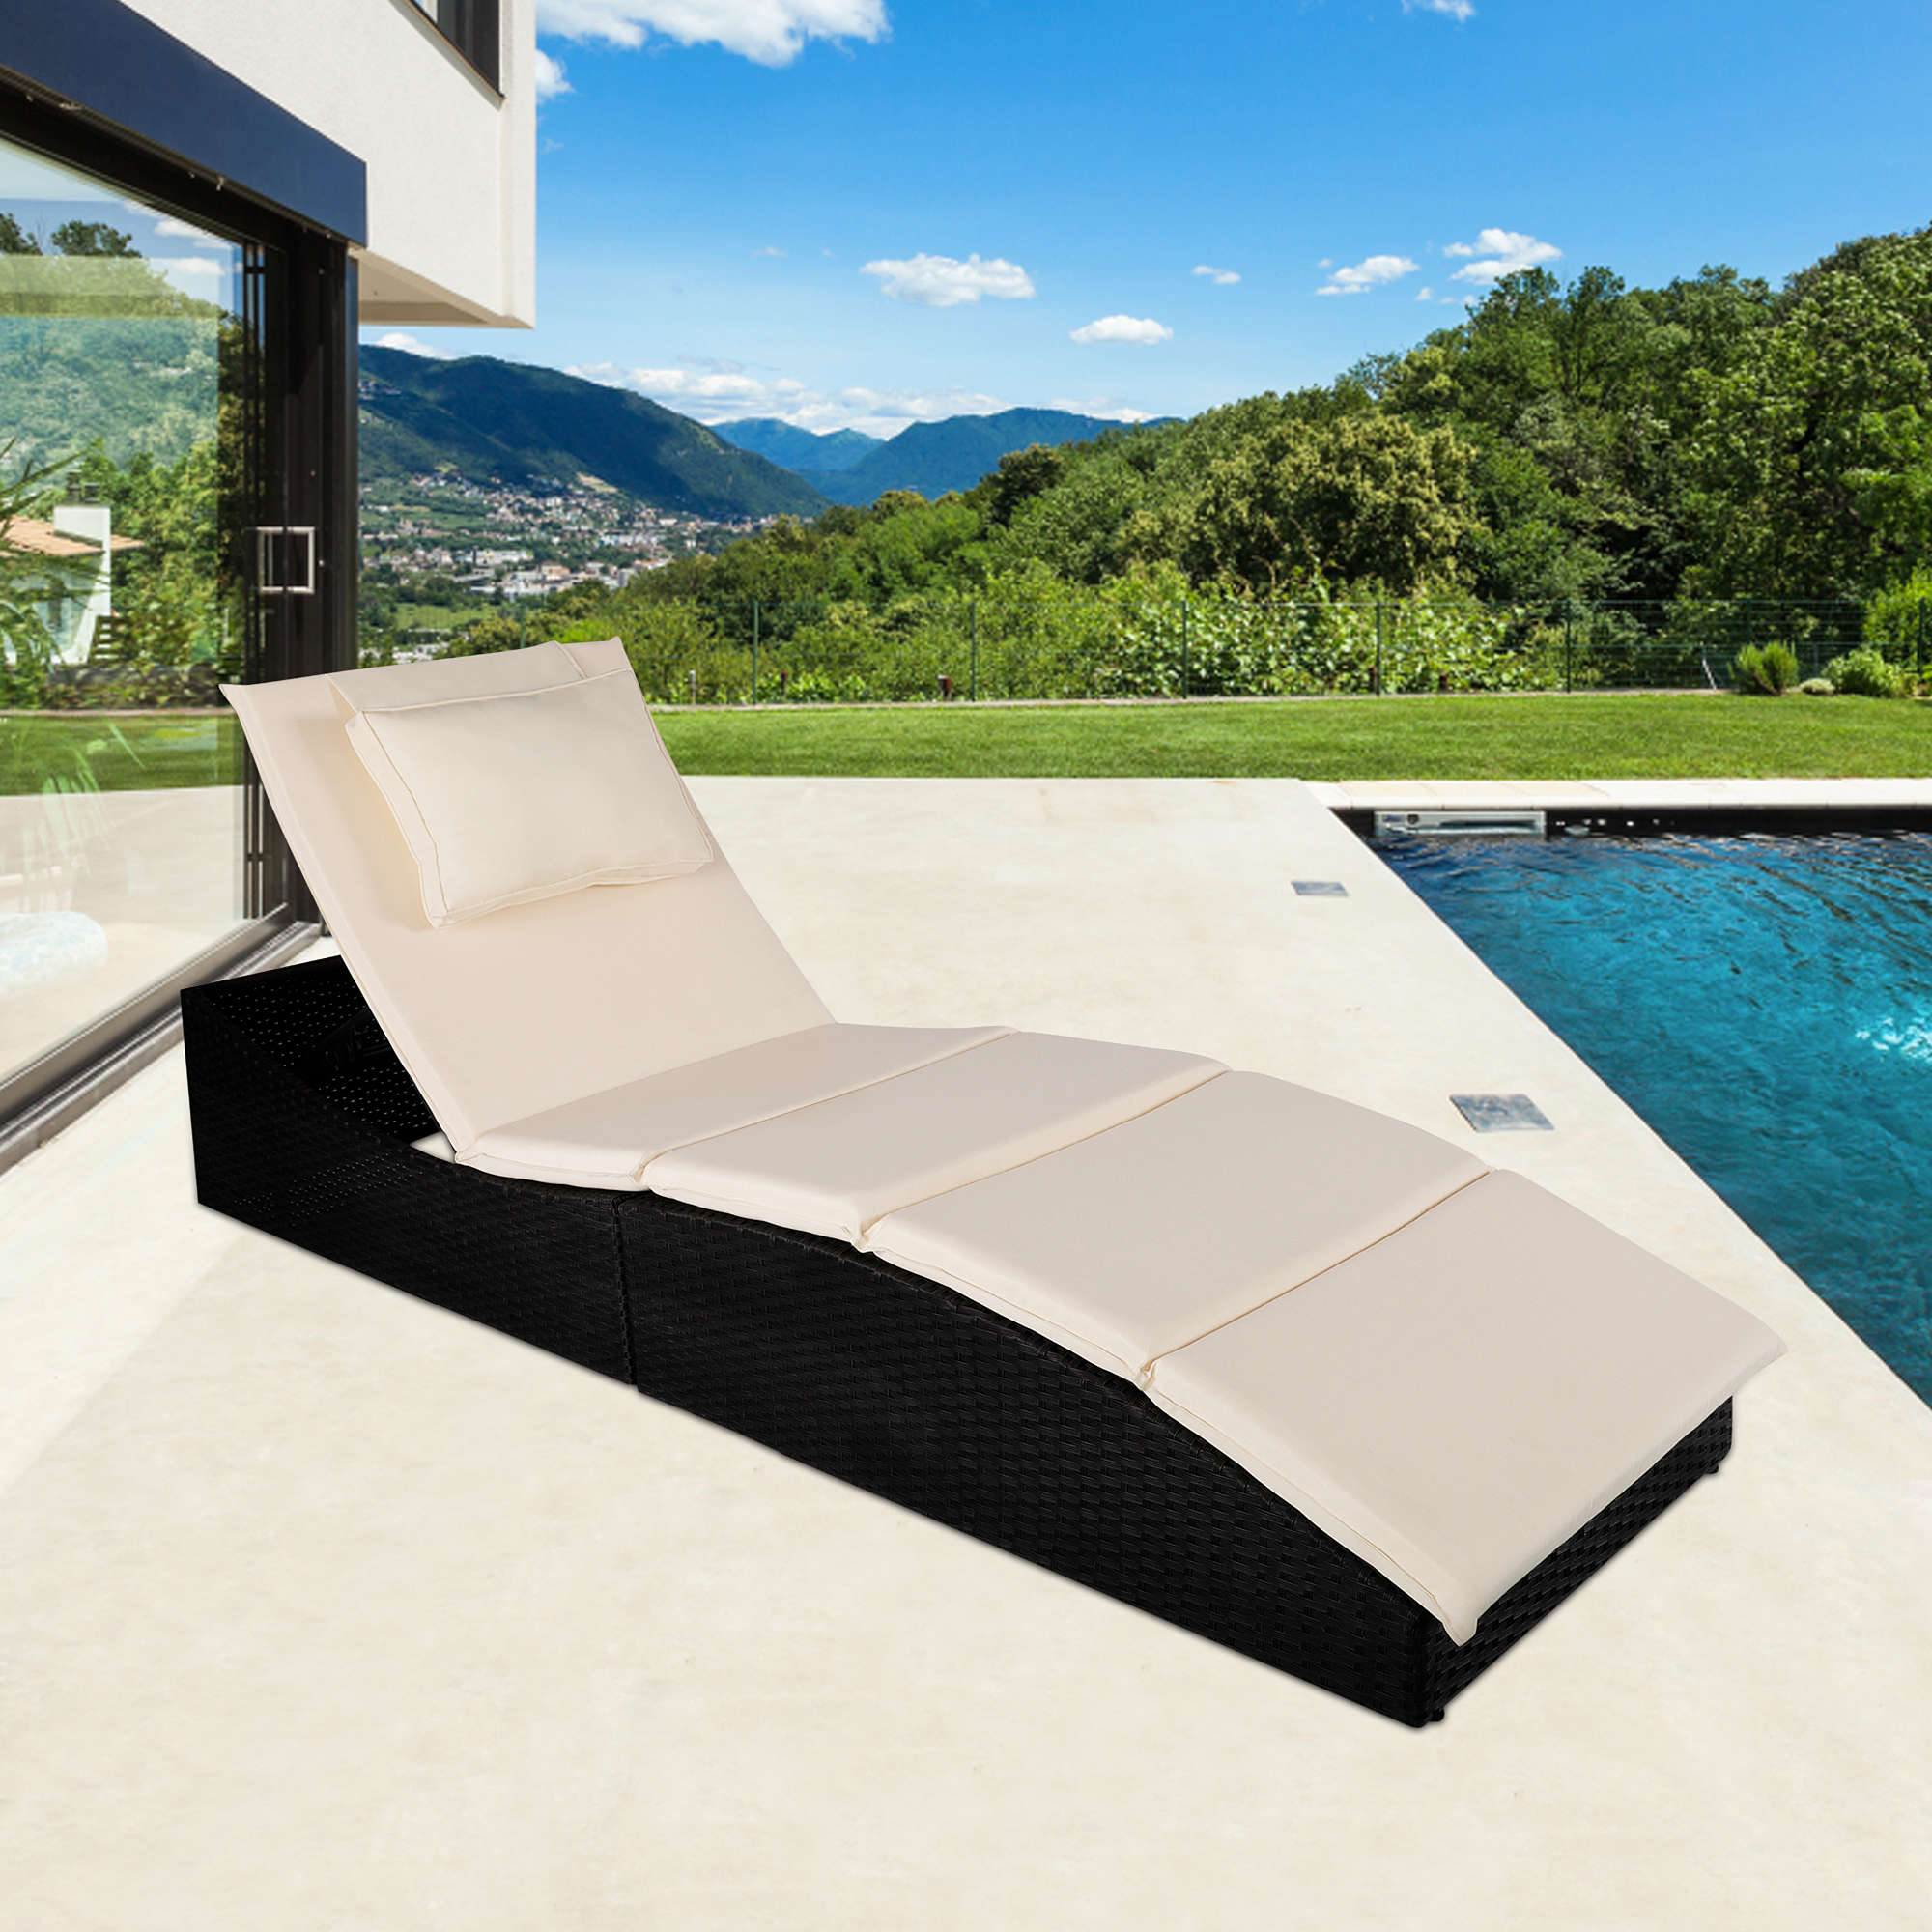 ENYOPRO Outdoor Chaise Lounge Chair, Adjustable Chaise Lounge Chair with Cushion, for Outdoor Patio Beach Pool Backyard, Folding PE Rattan Reclining Lounger Chair Furniture Chaise, K2685 - image 1 of 9